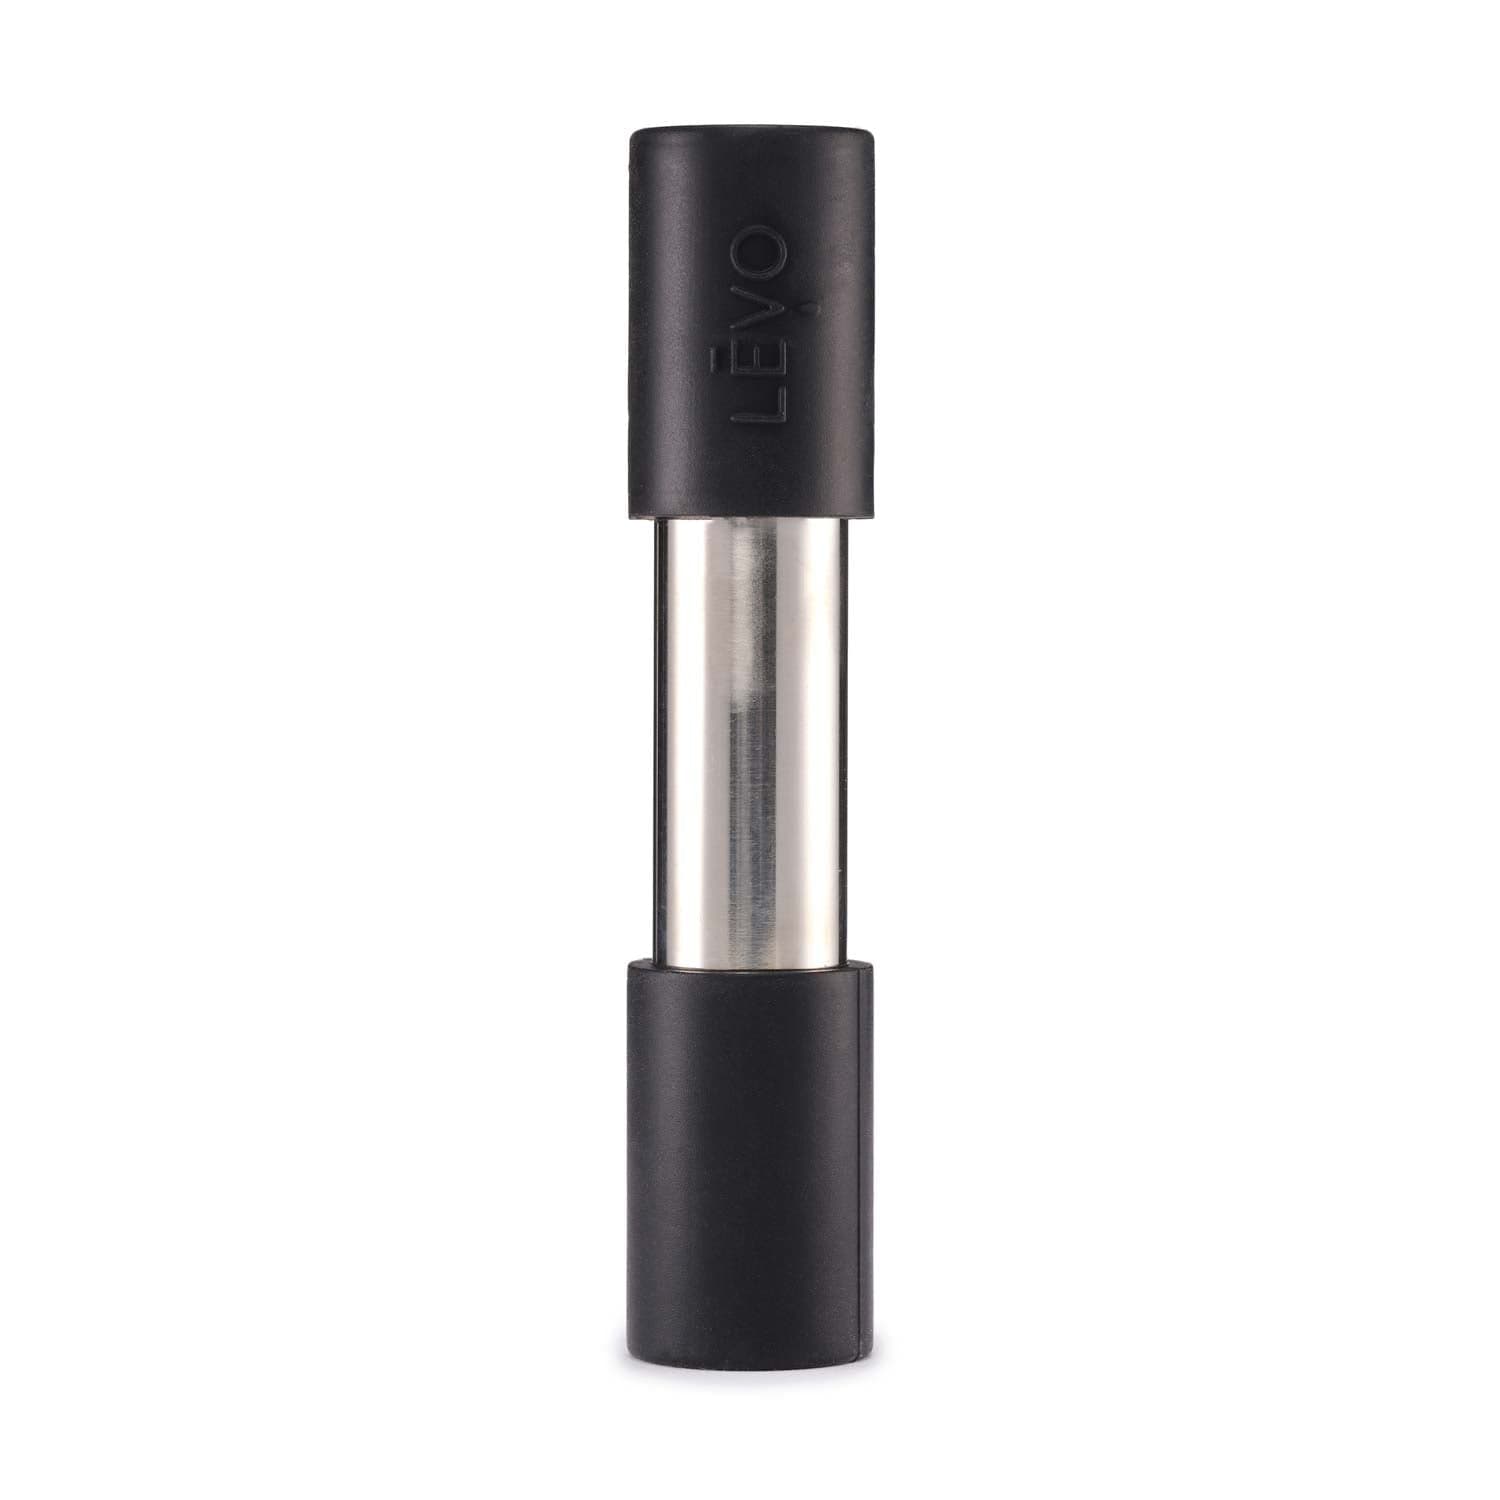 LEVO Herb Press: Designed to fit perfectly in the LĒVO Herb Pod